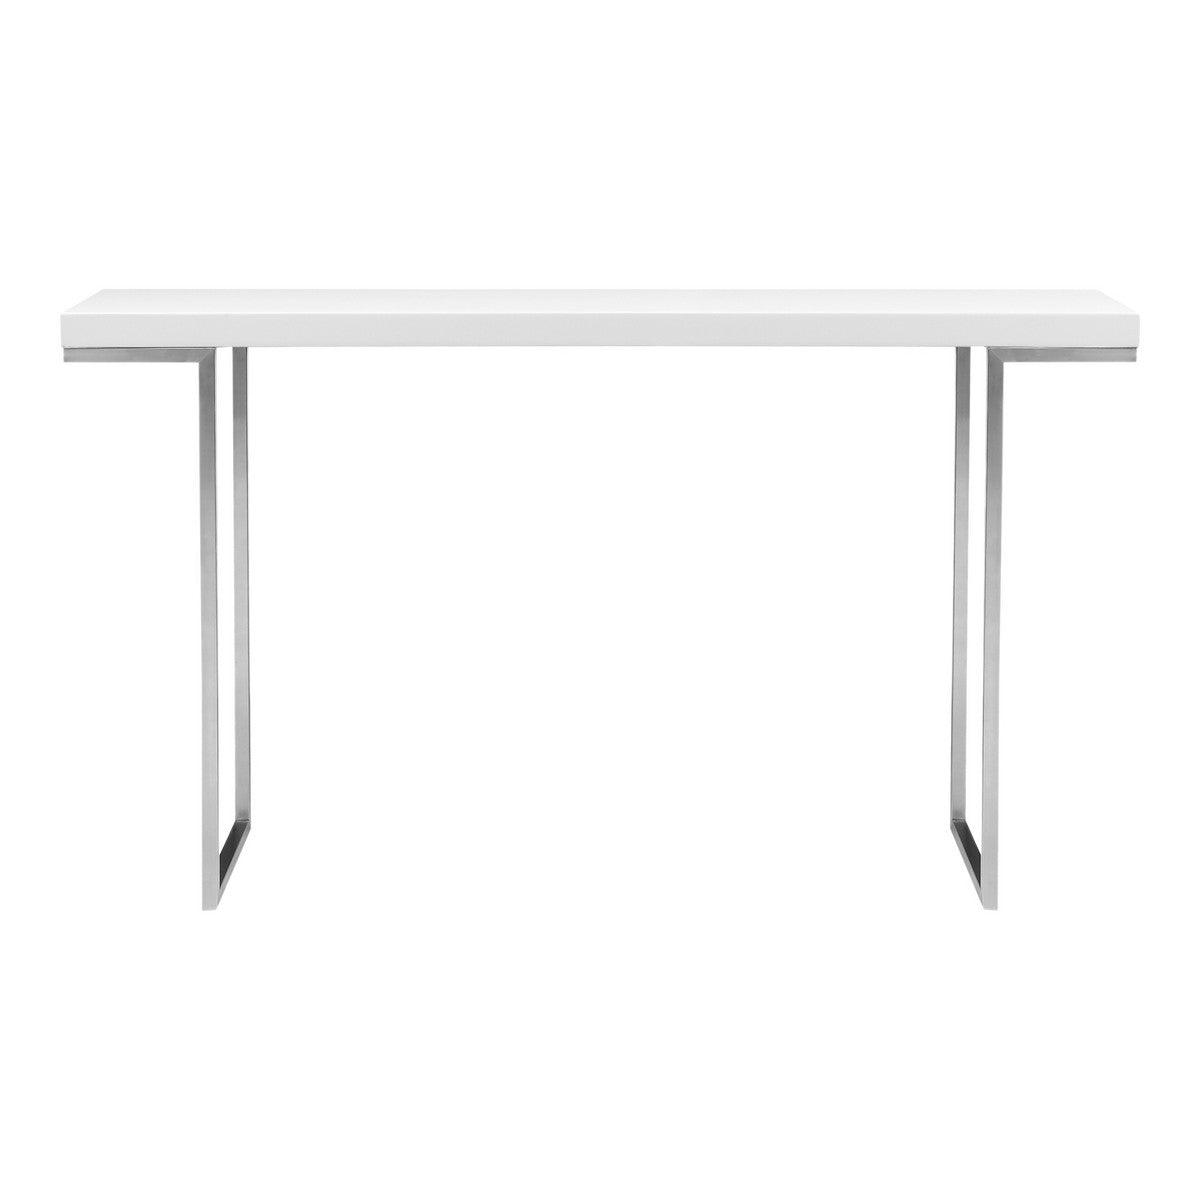 Moe's Home Collection Repetir Console Table White Lacquer - ER-1023-18 - Moe's Home Collection - Console Tables - Minimal And Modern - 1